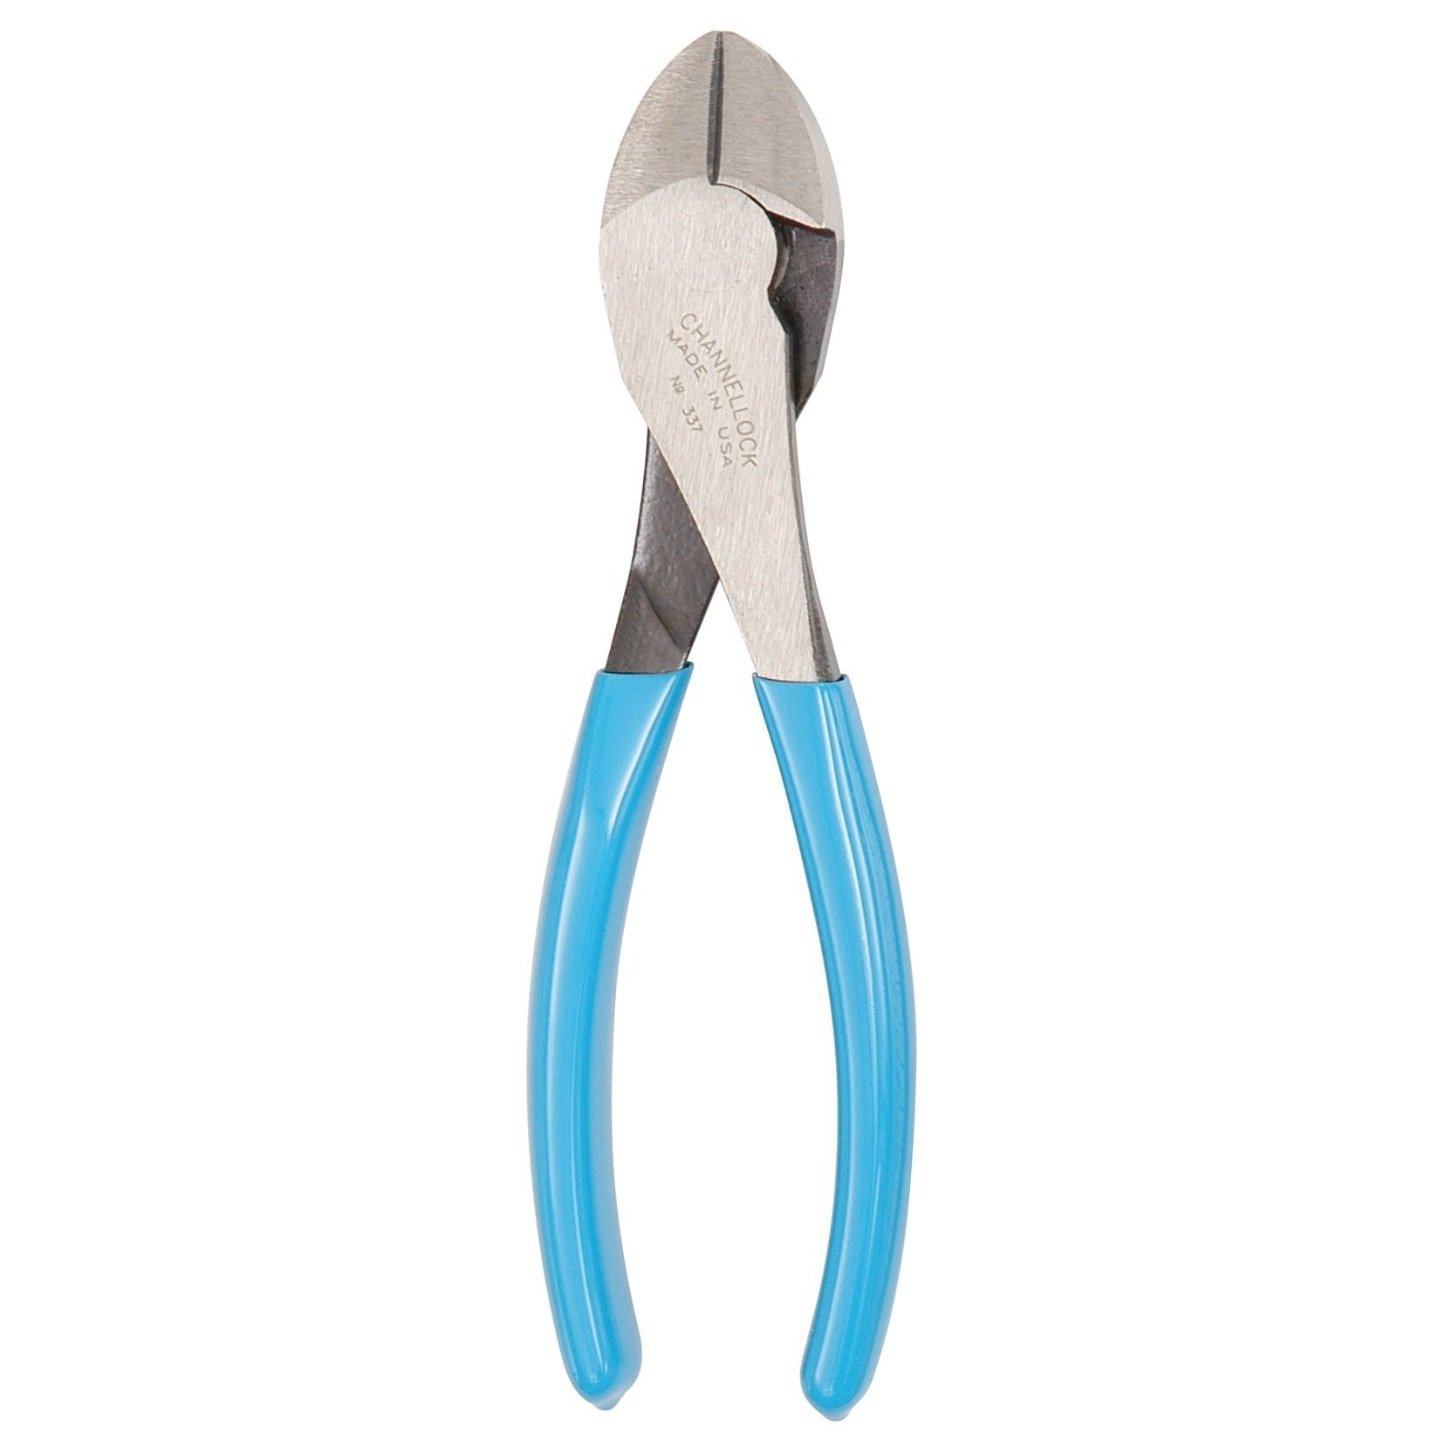 Channellock 7" High Leverage Diagonal Lap Joint Cutting Plier Side Cutters 337